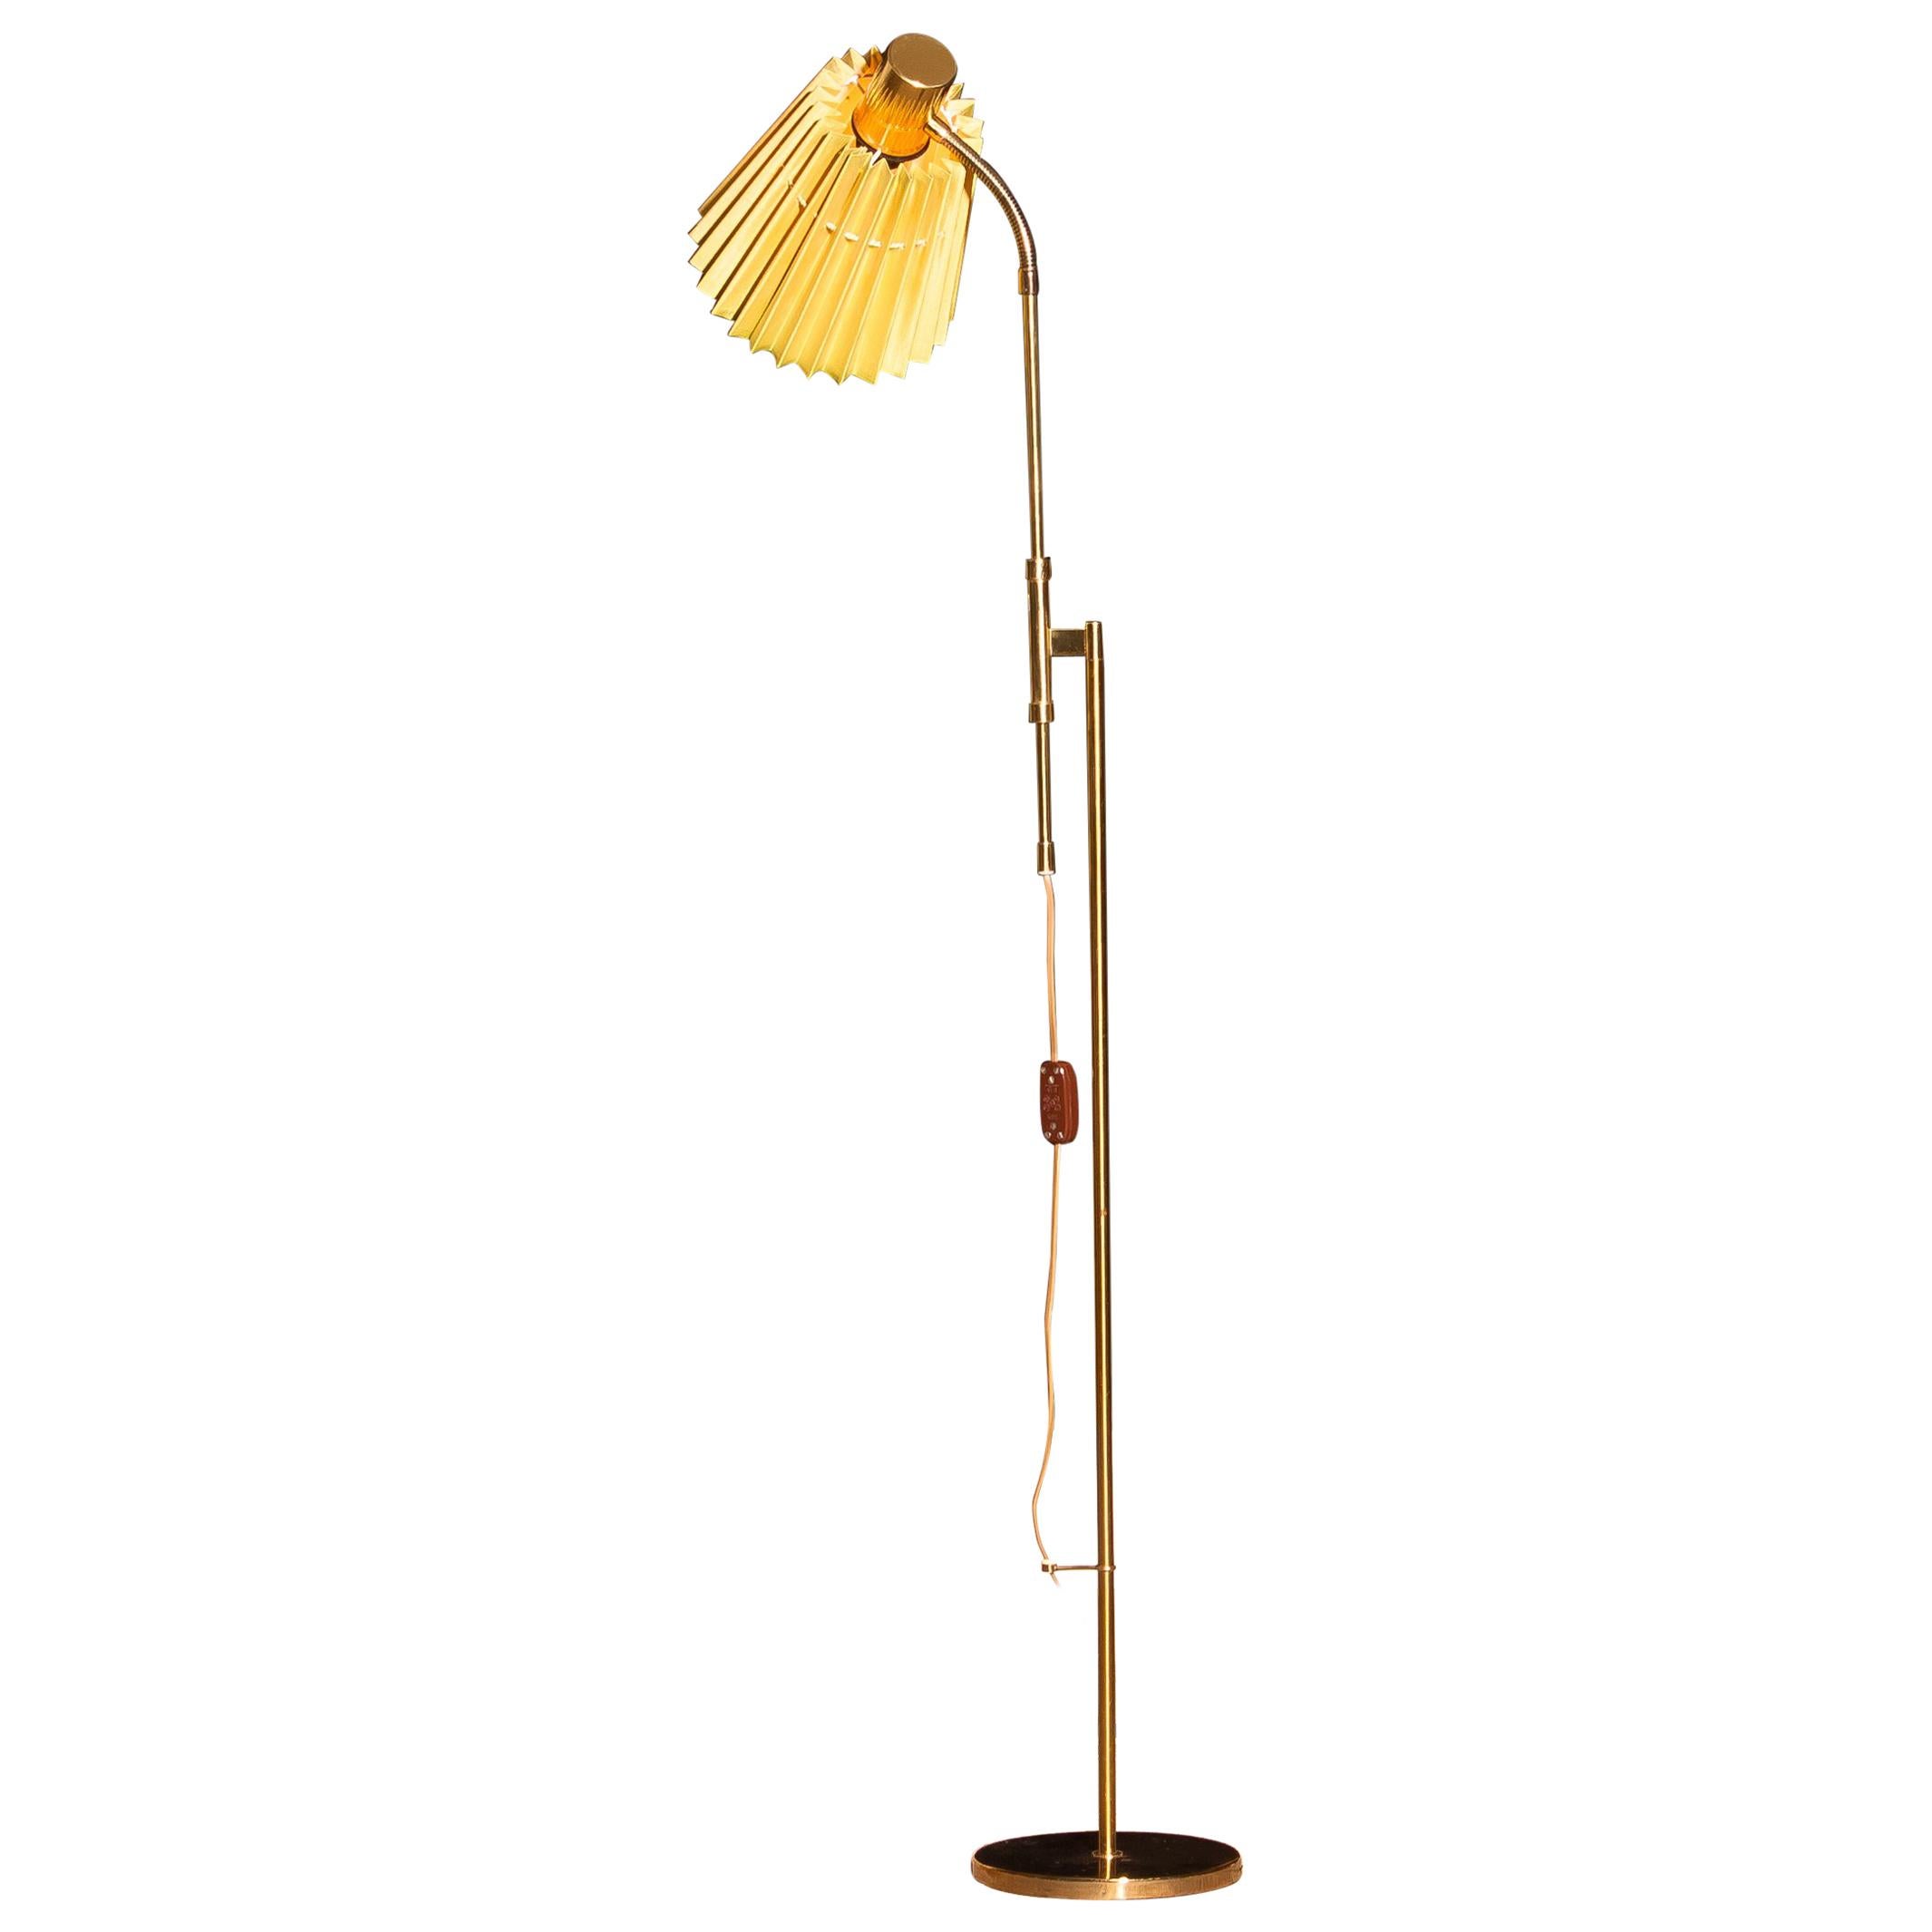 Adjustable brass floor lamp by Möllers Armaturfabrik, Sweden. 
It's in perfect condition and technically 100%. 
Wired for 110 and 220 volts.
Period 1950.
Measures: Height is adjustable between 115 and 145 cm
The shade is ø 20 cm.